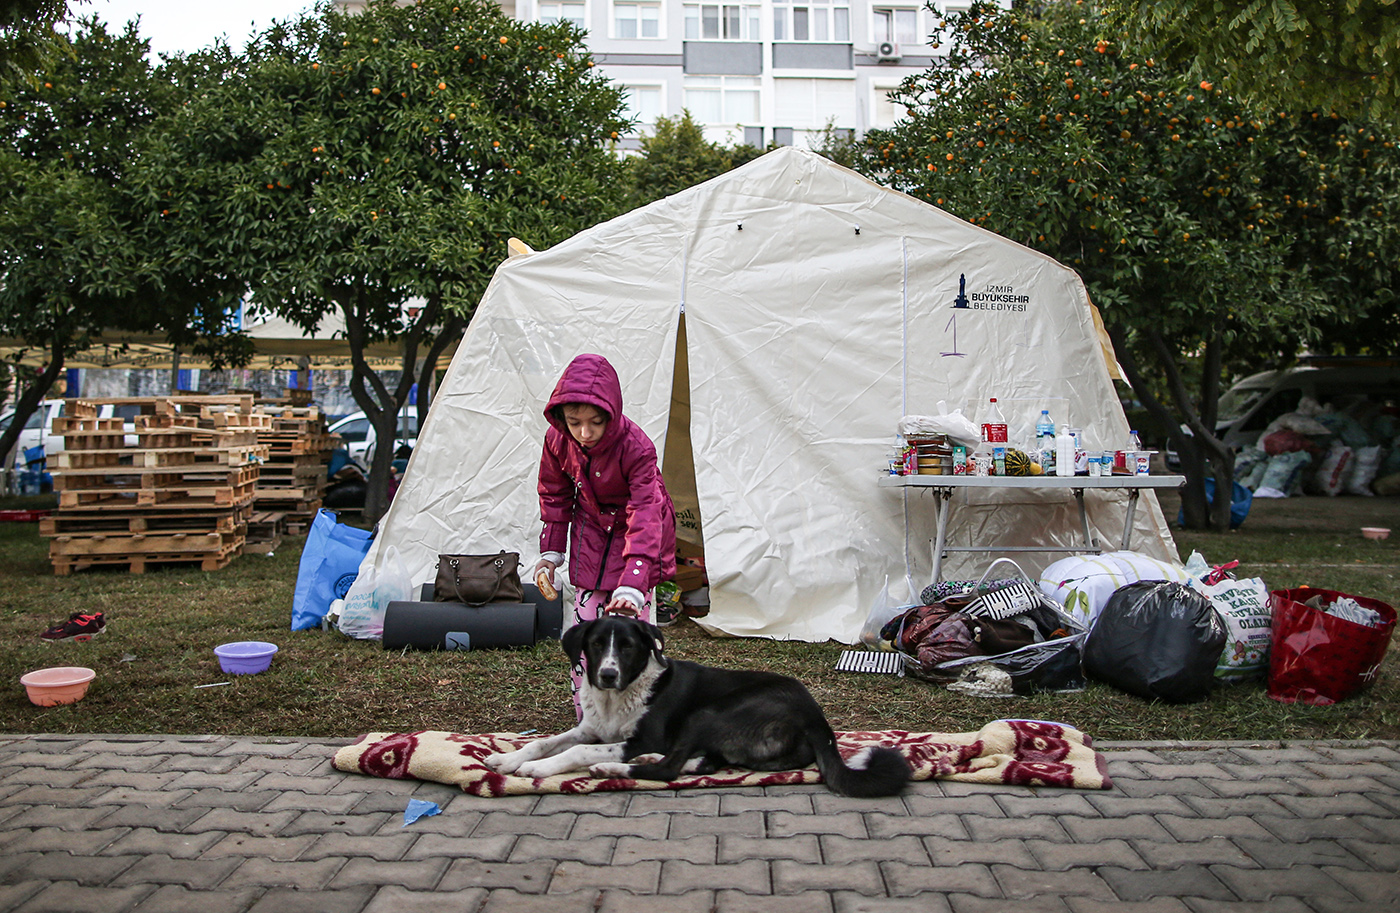 A girl caress a dog in front of her tent after a 7.0-magnitude earthquake, at Bayrakli district in Izmir, Turkey, 03 November 2020. According to latest reports, at least 95 people died and more than 900 were injured in the earthquake that hit the Aegean Sea on 30 October 2020.